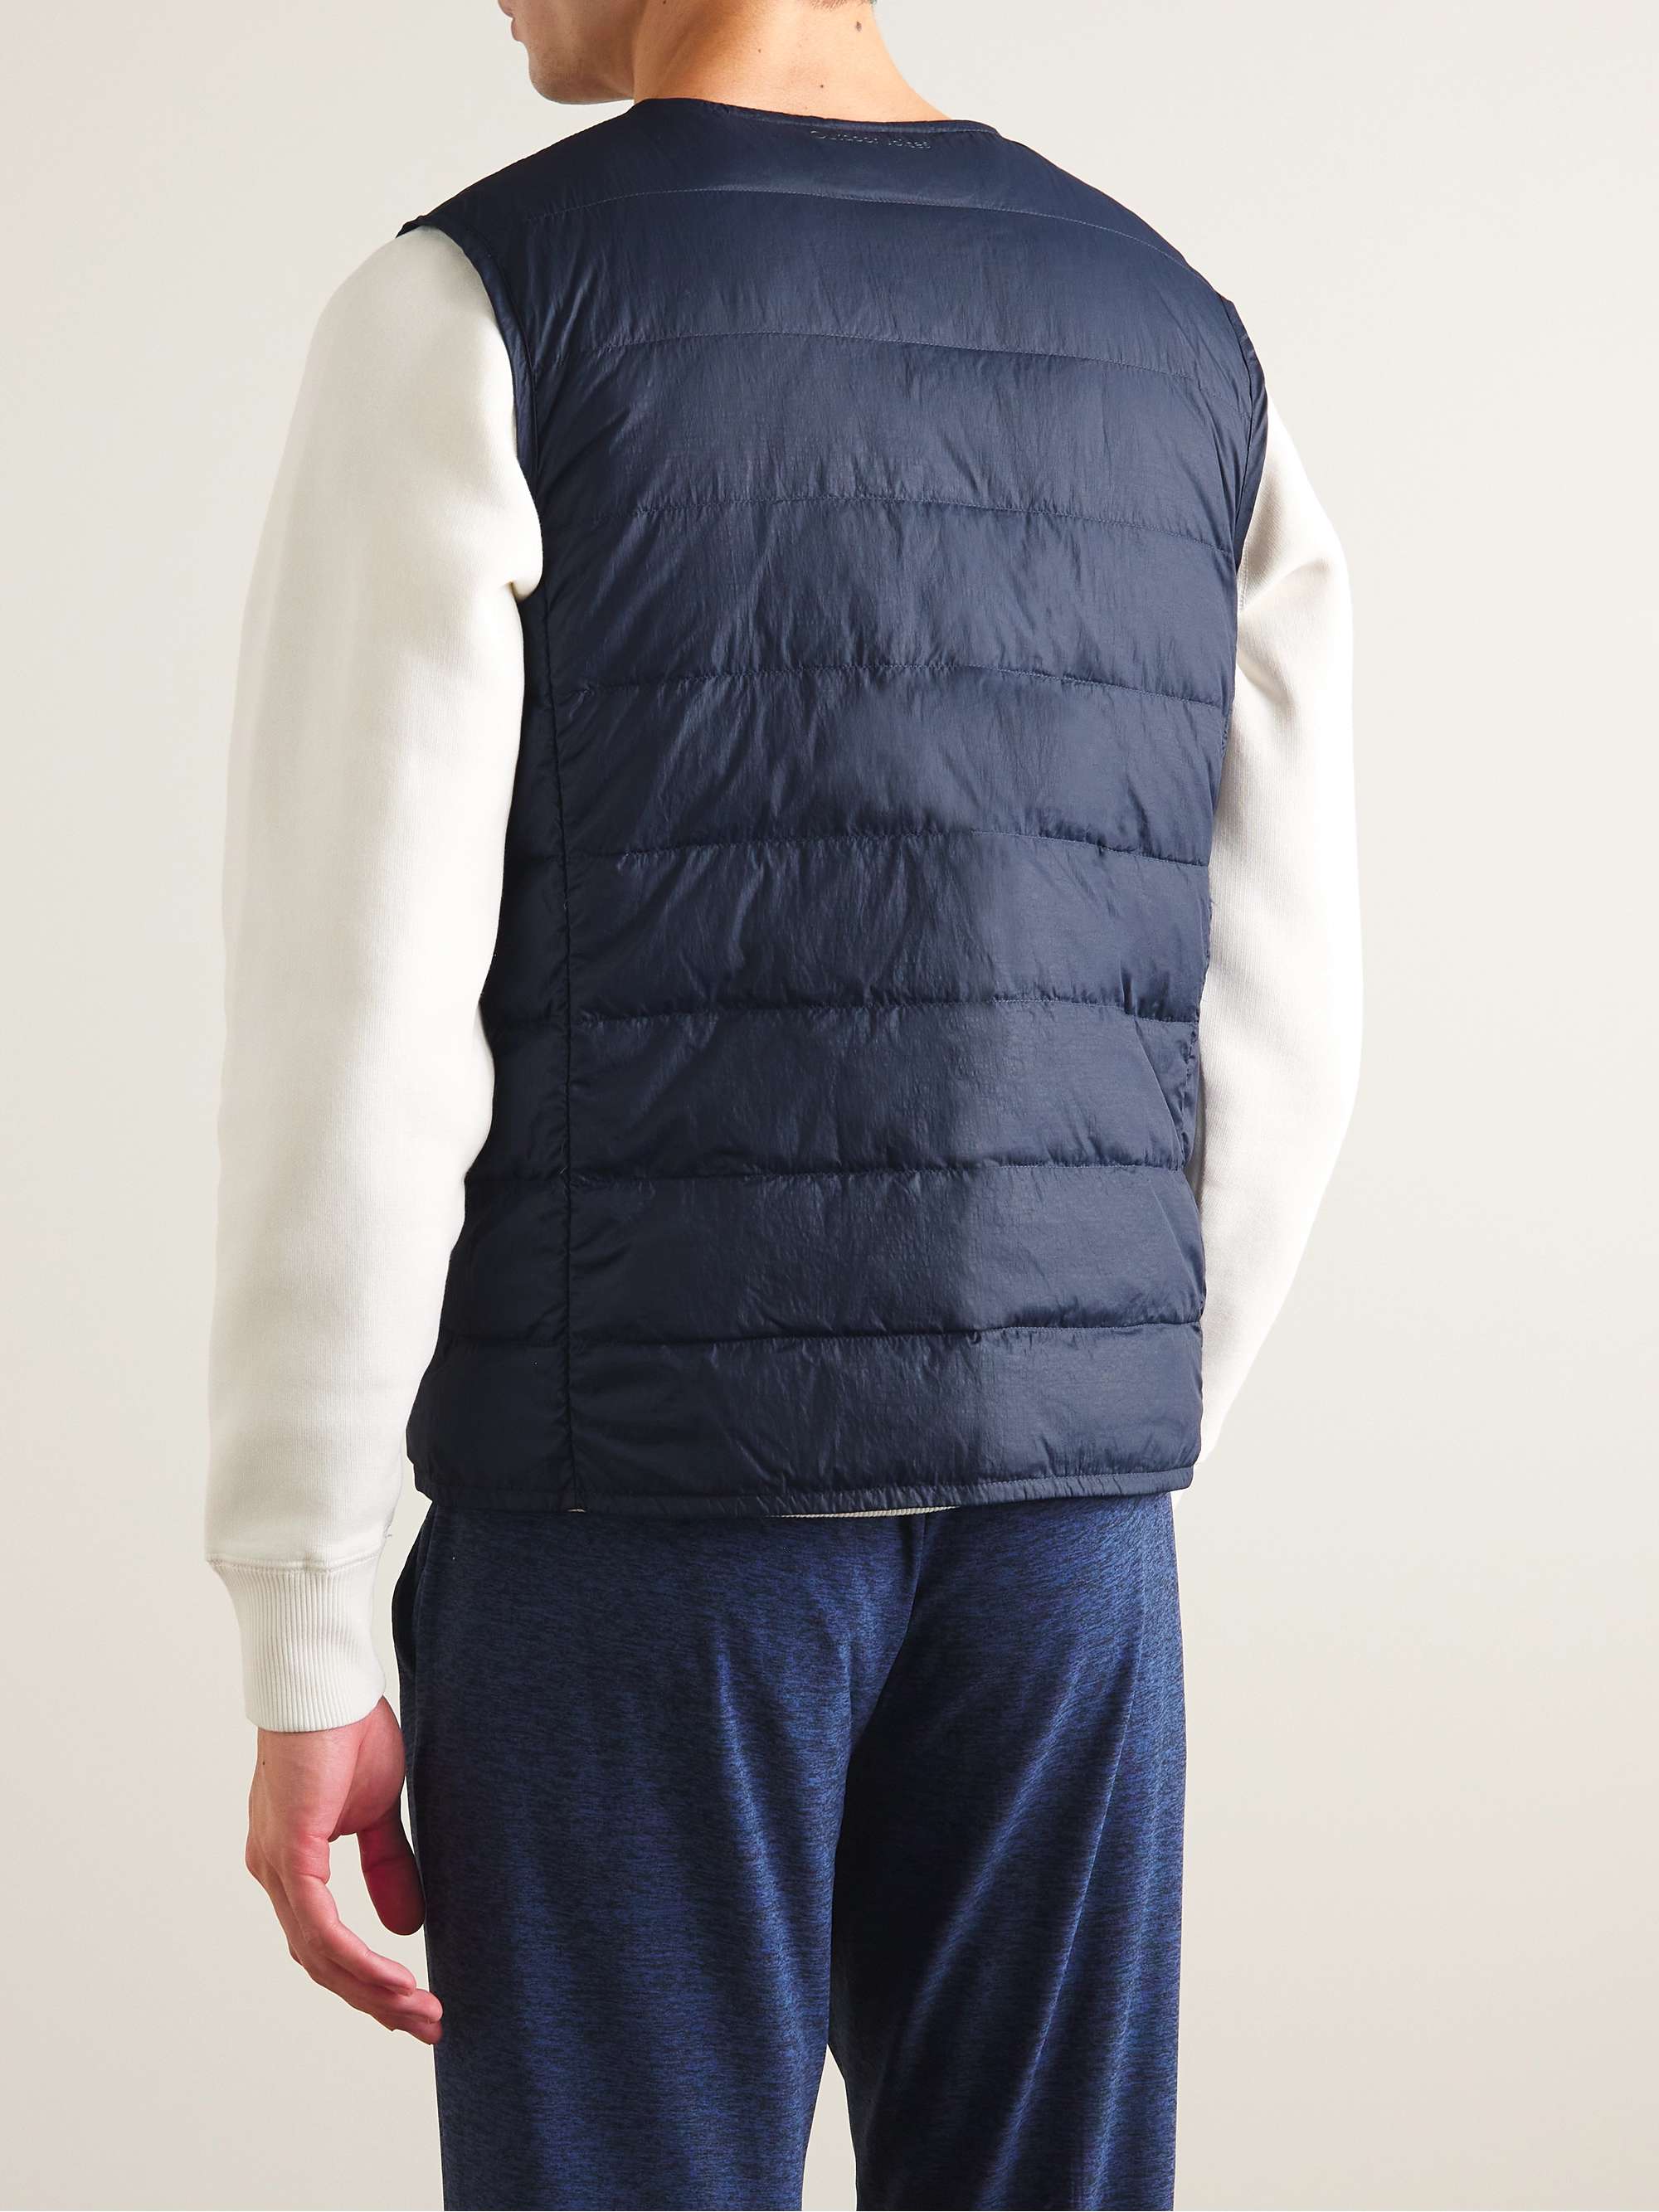 OUTDOOR VOICES Quilted SoftShield Down Gilet